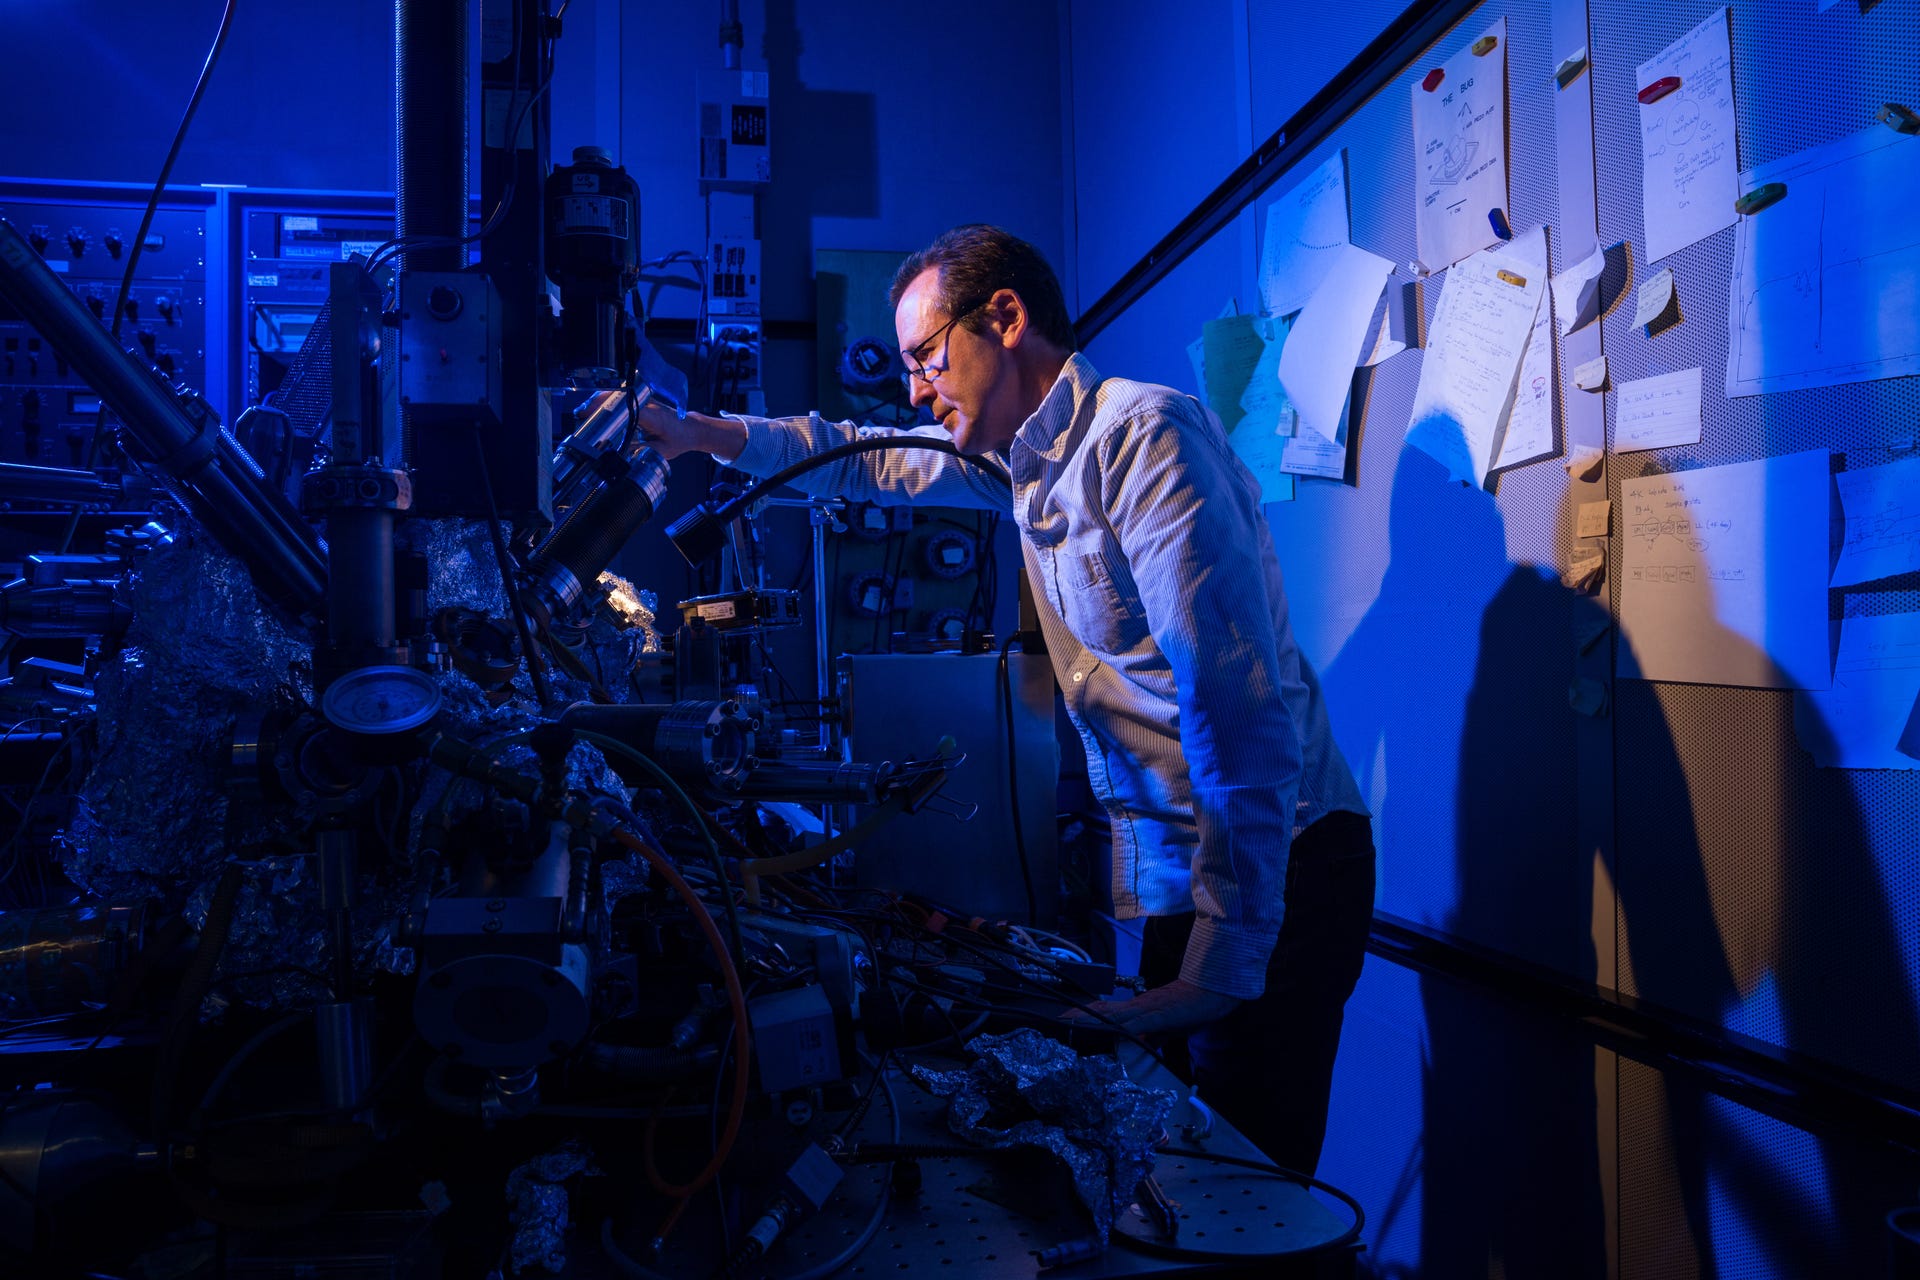 IBM researcher Chris Lutz stands by a microscope he and colleagues used to store a bit of data on a single atom at IBM Research's Almaden campus.